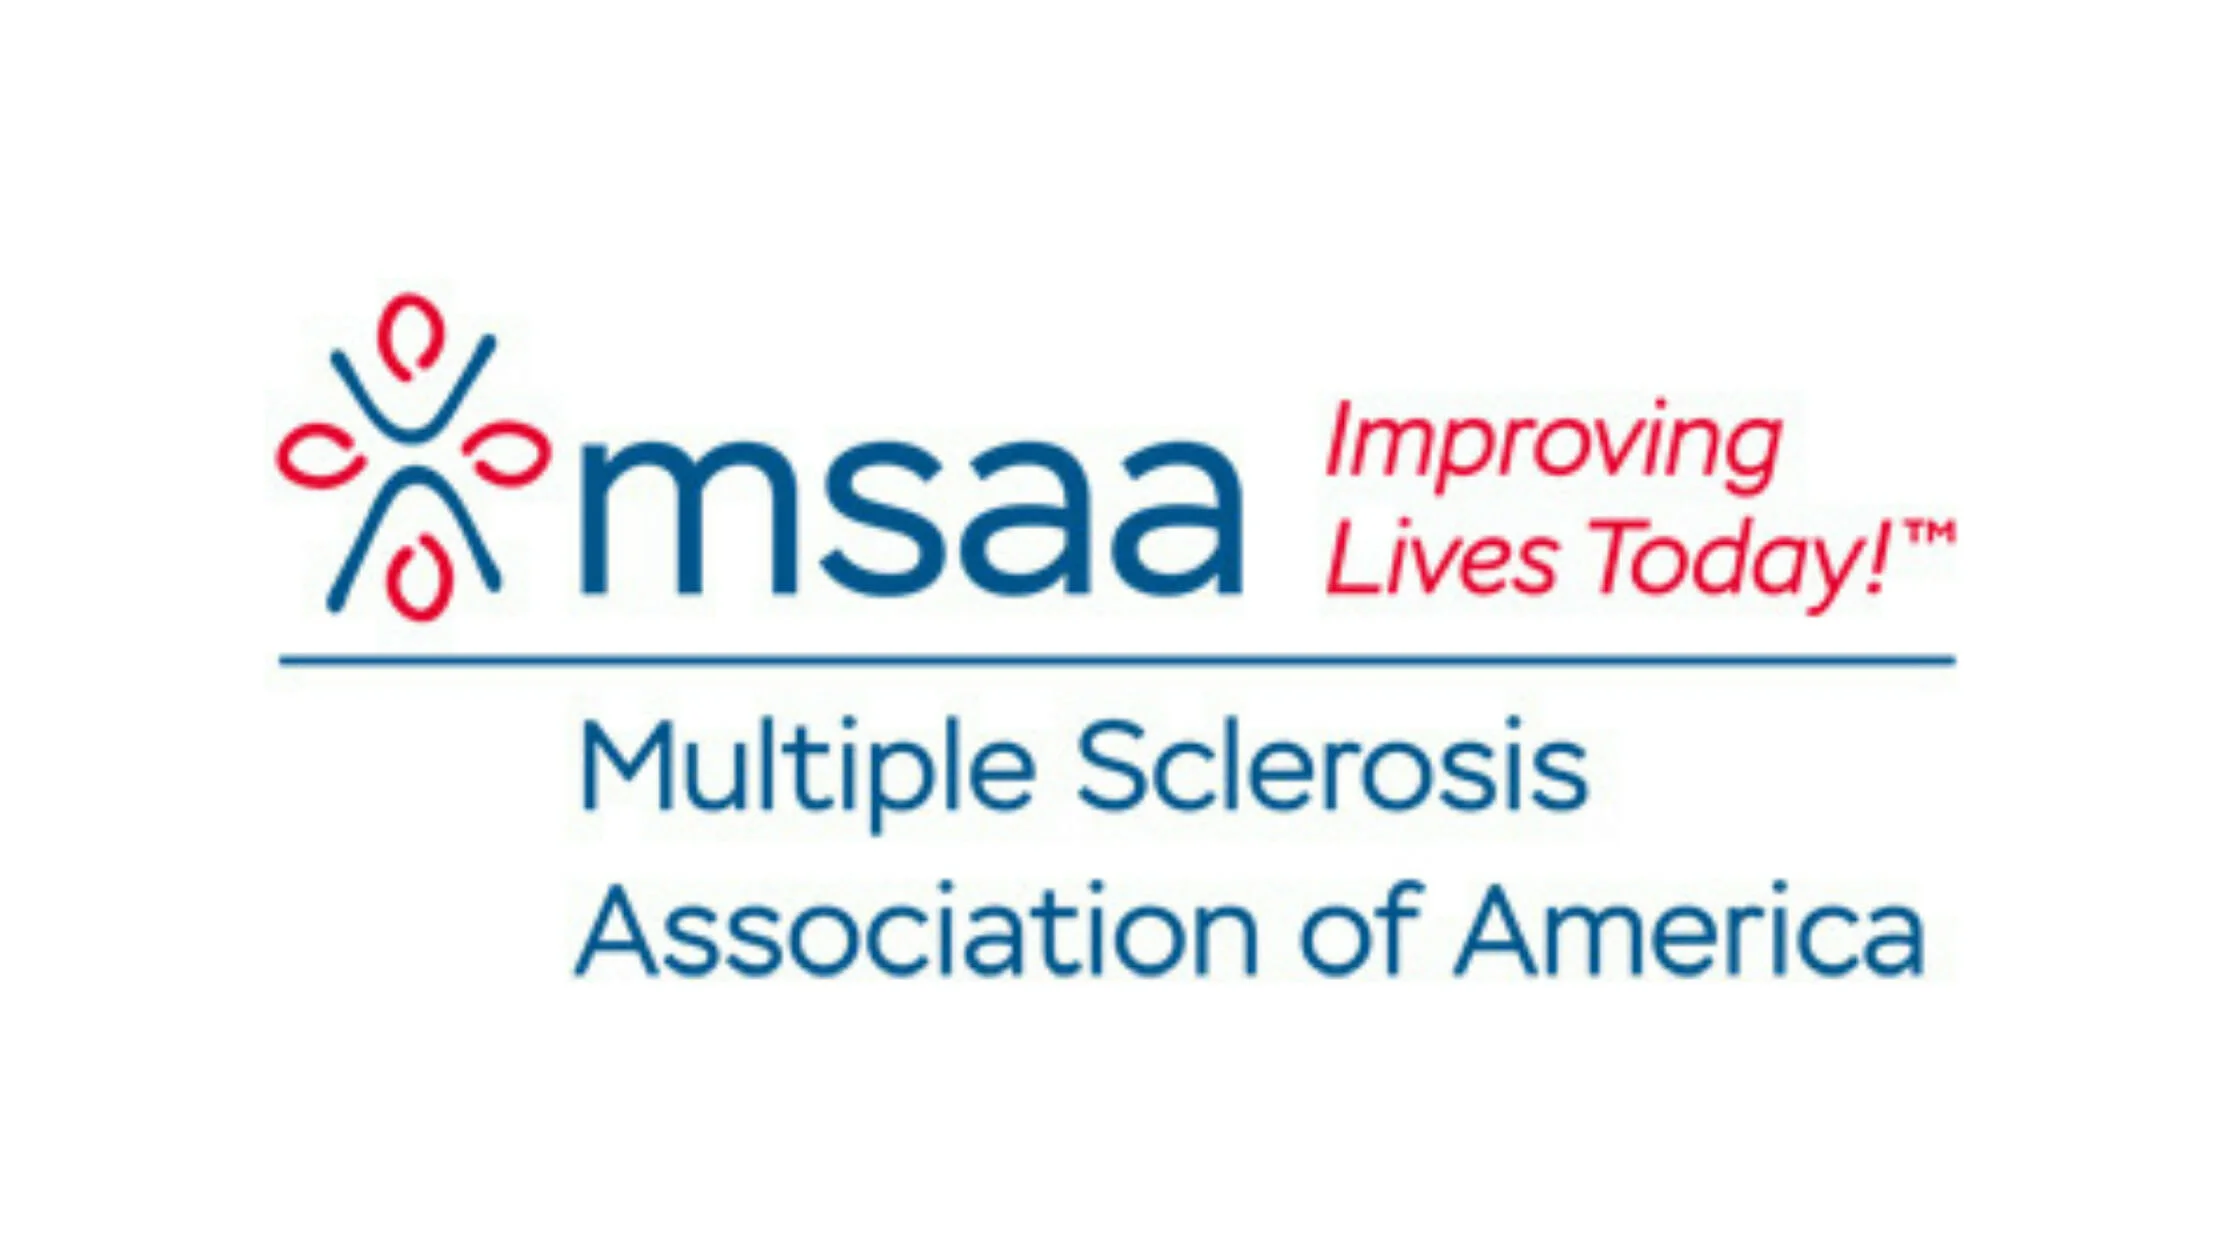 multiple-sclerosis-association-of-america-offers-ms-symptom-management-education-this-month-bell-associates-consulting-firm